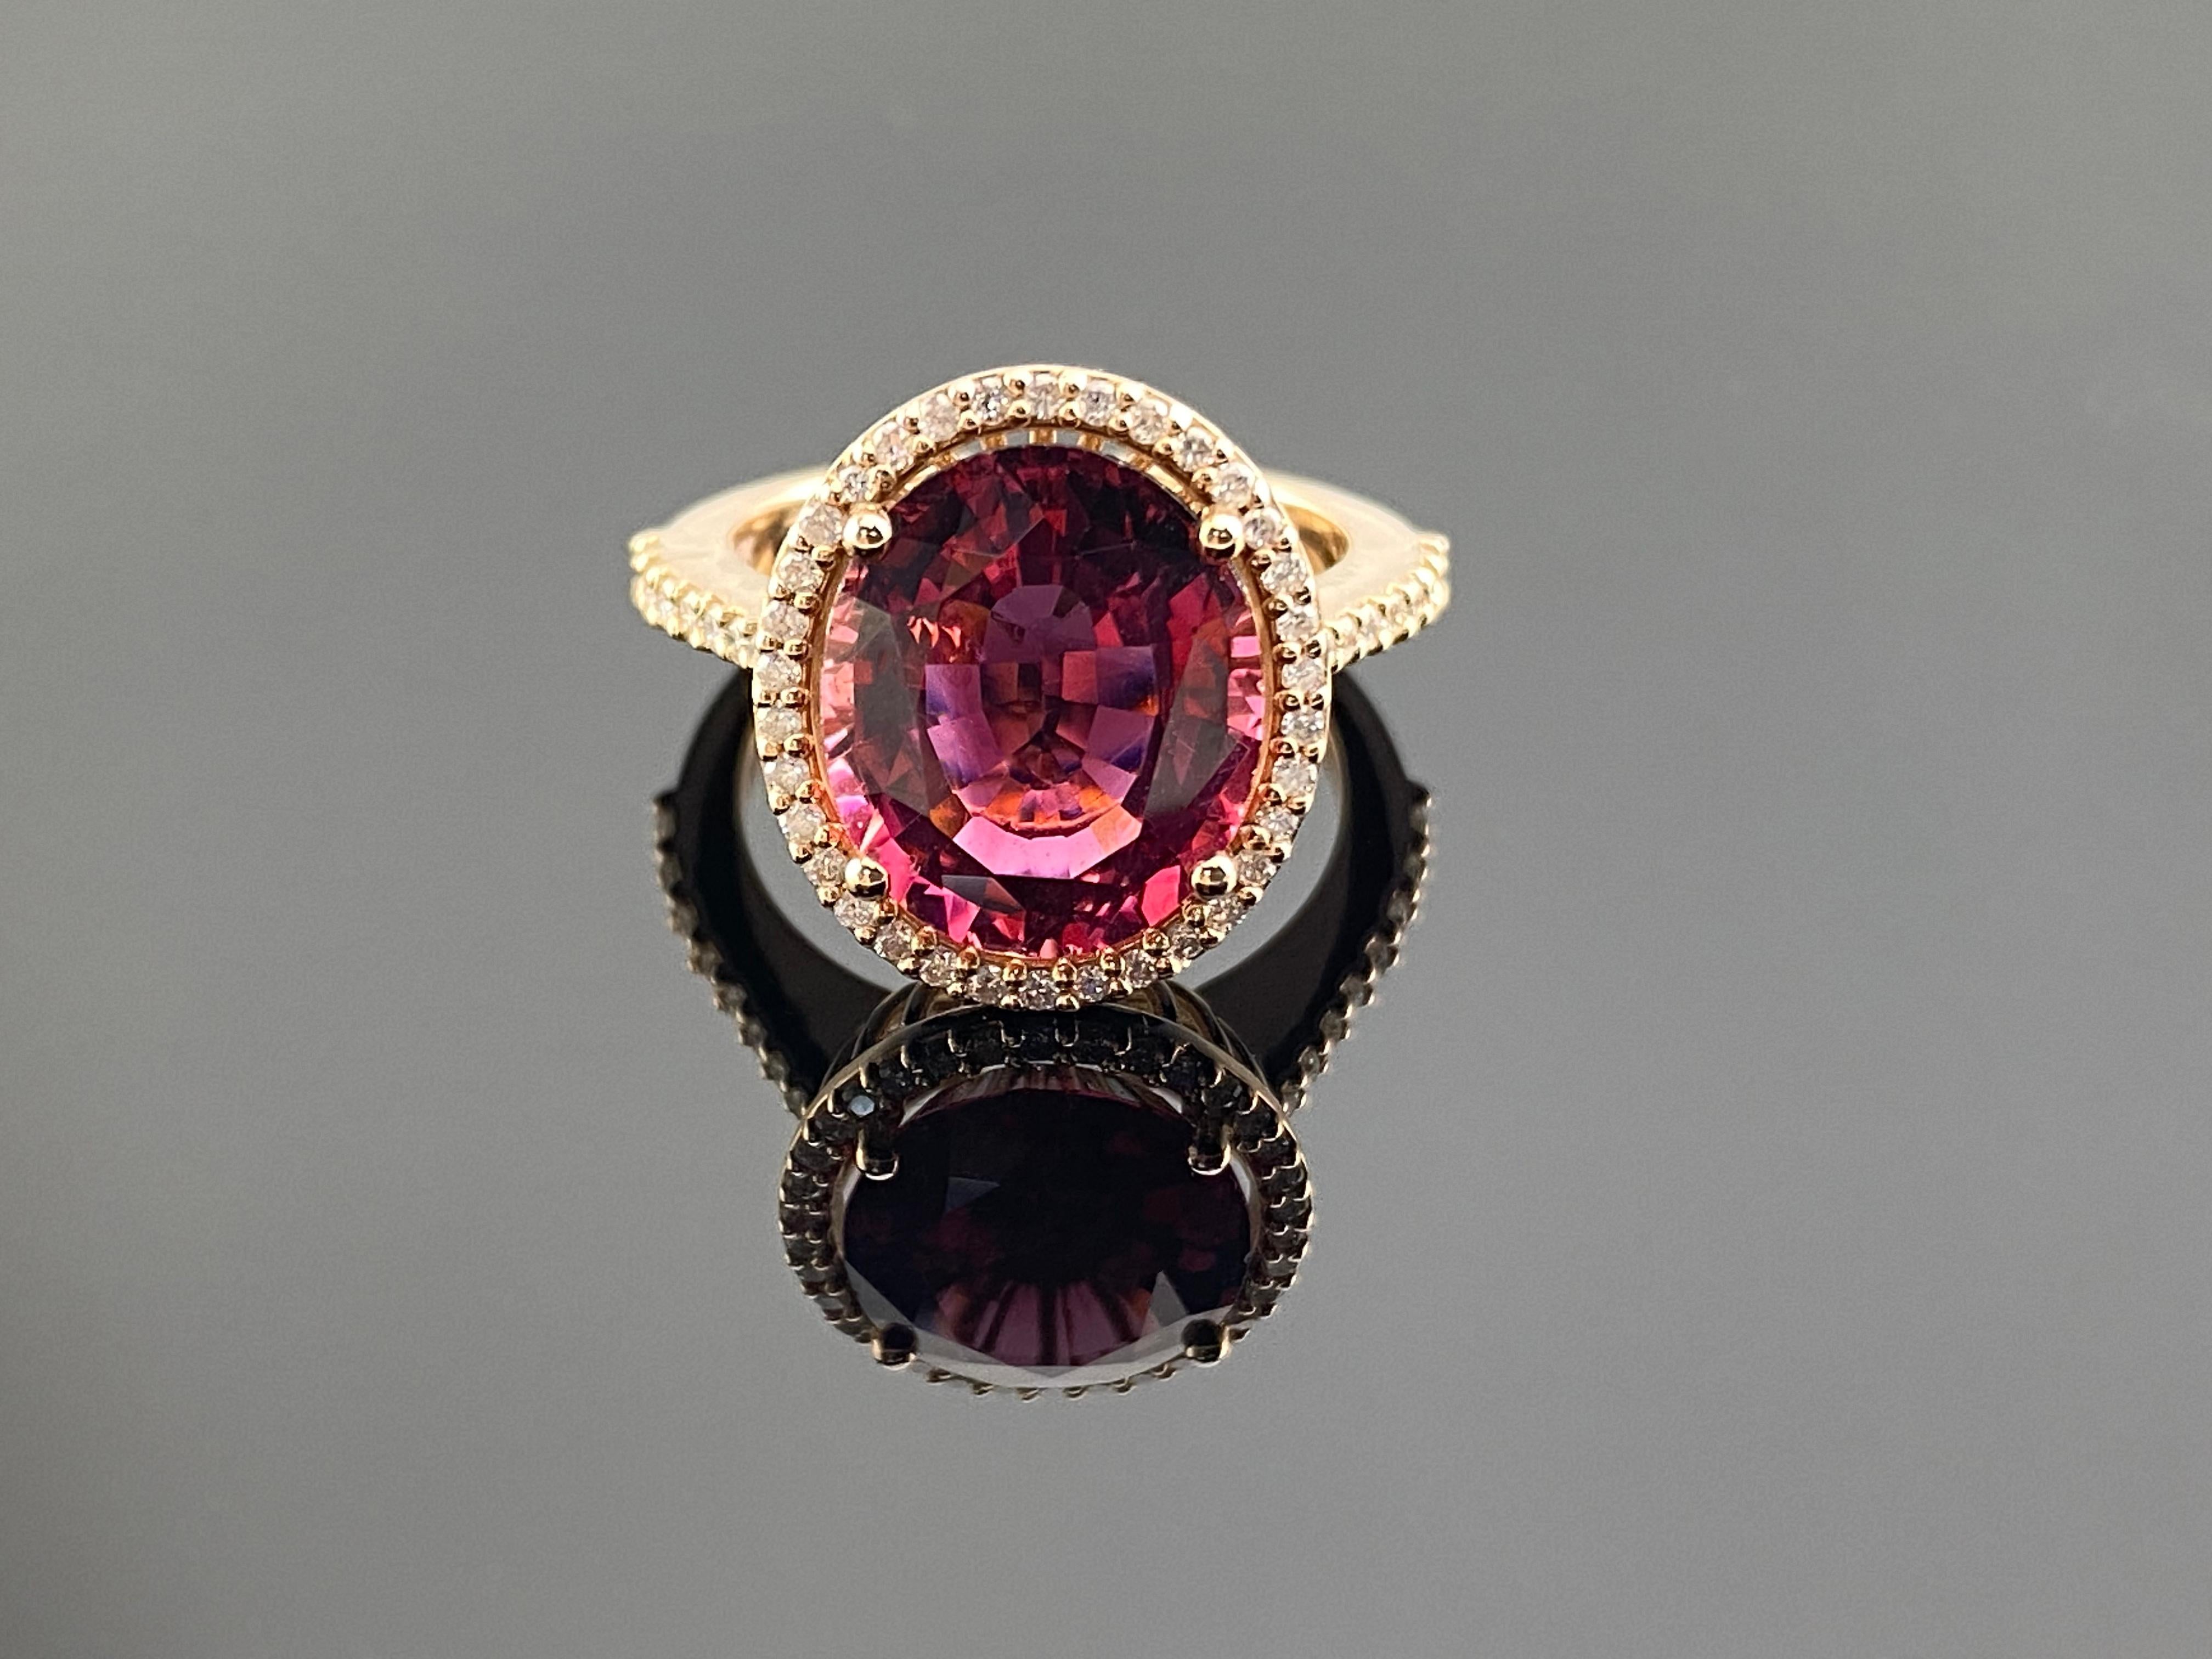 Make a glamorous entrance with this custom made 18k rose/pink gold vintage-influenced ring, artistically crafted in a brightly polished shine. A large 5.03 carat pink rubellite nestles in a secure prong setting in the center. Sparkling round